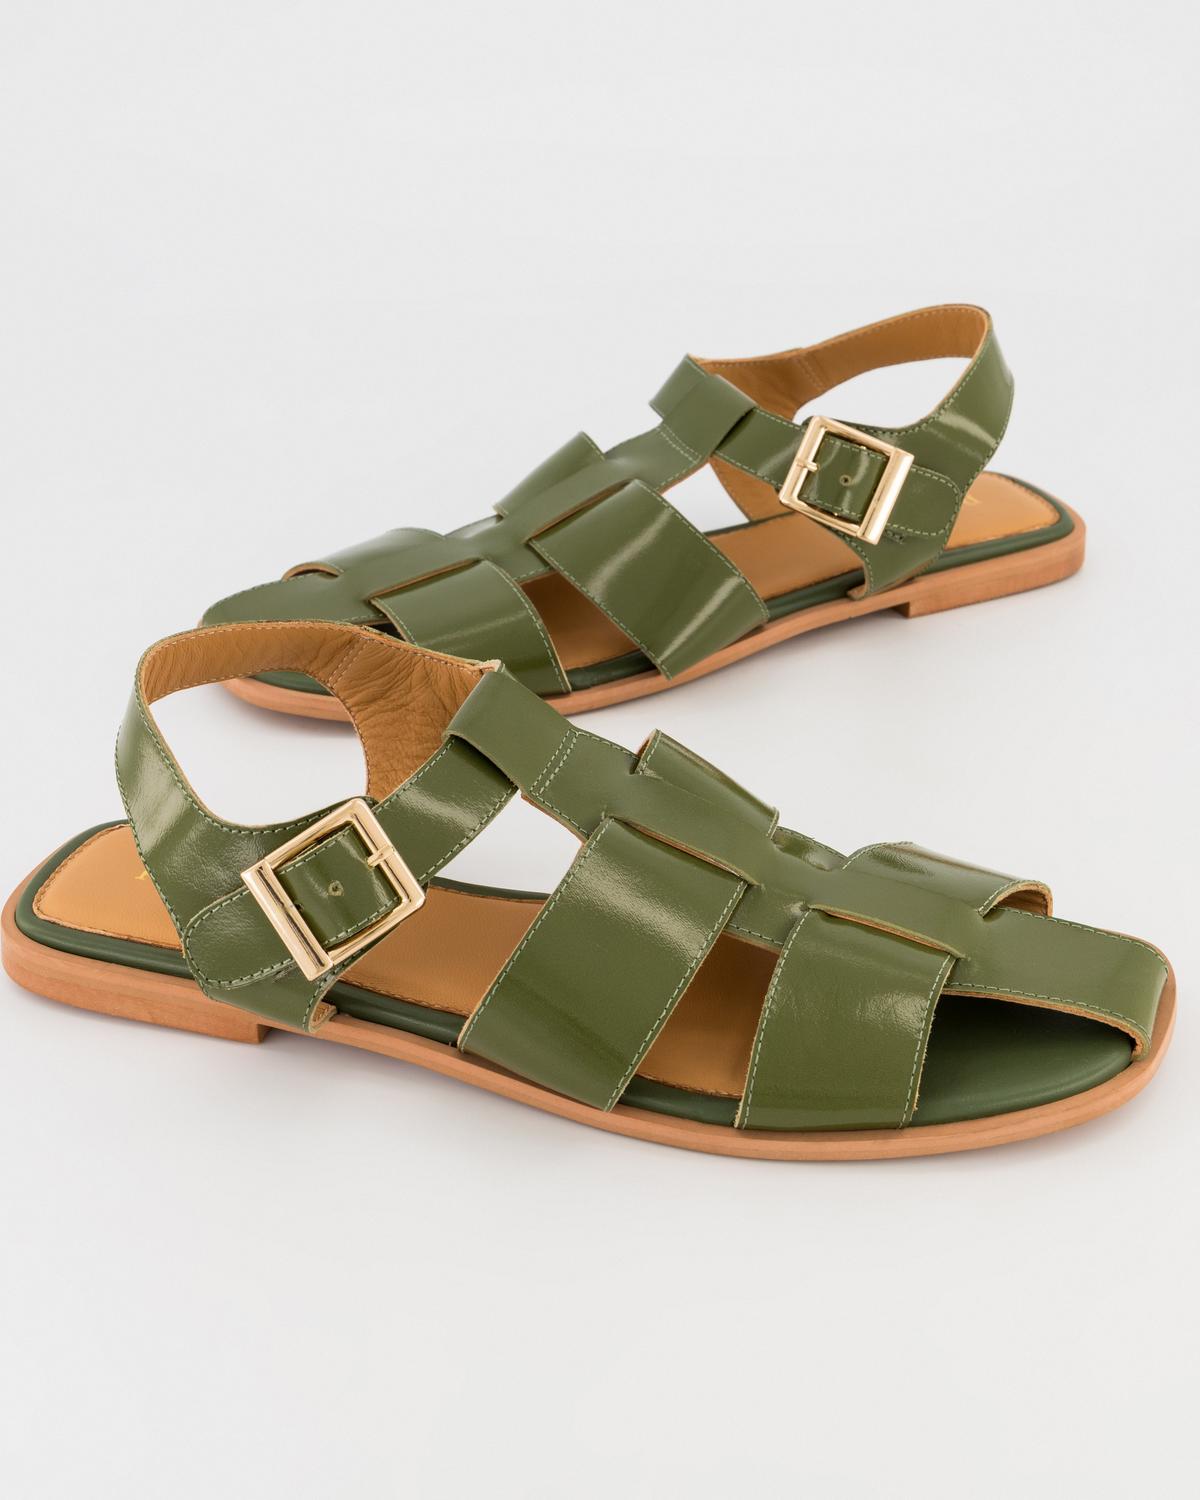 Janina Patent Sandal - Poetry Clothing Store